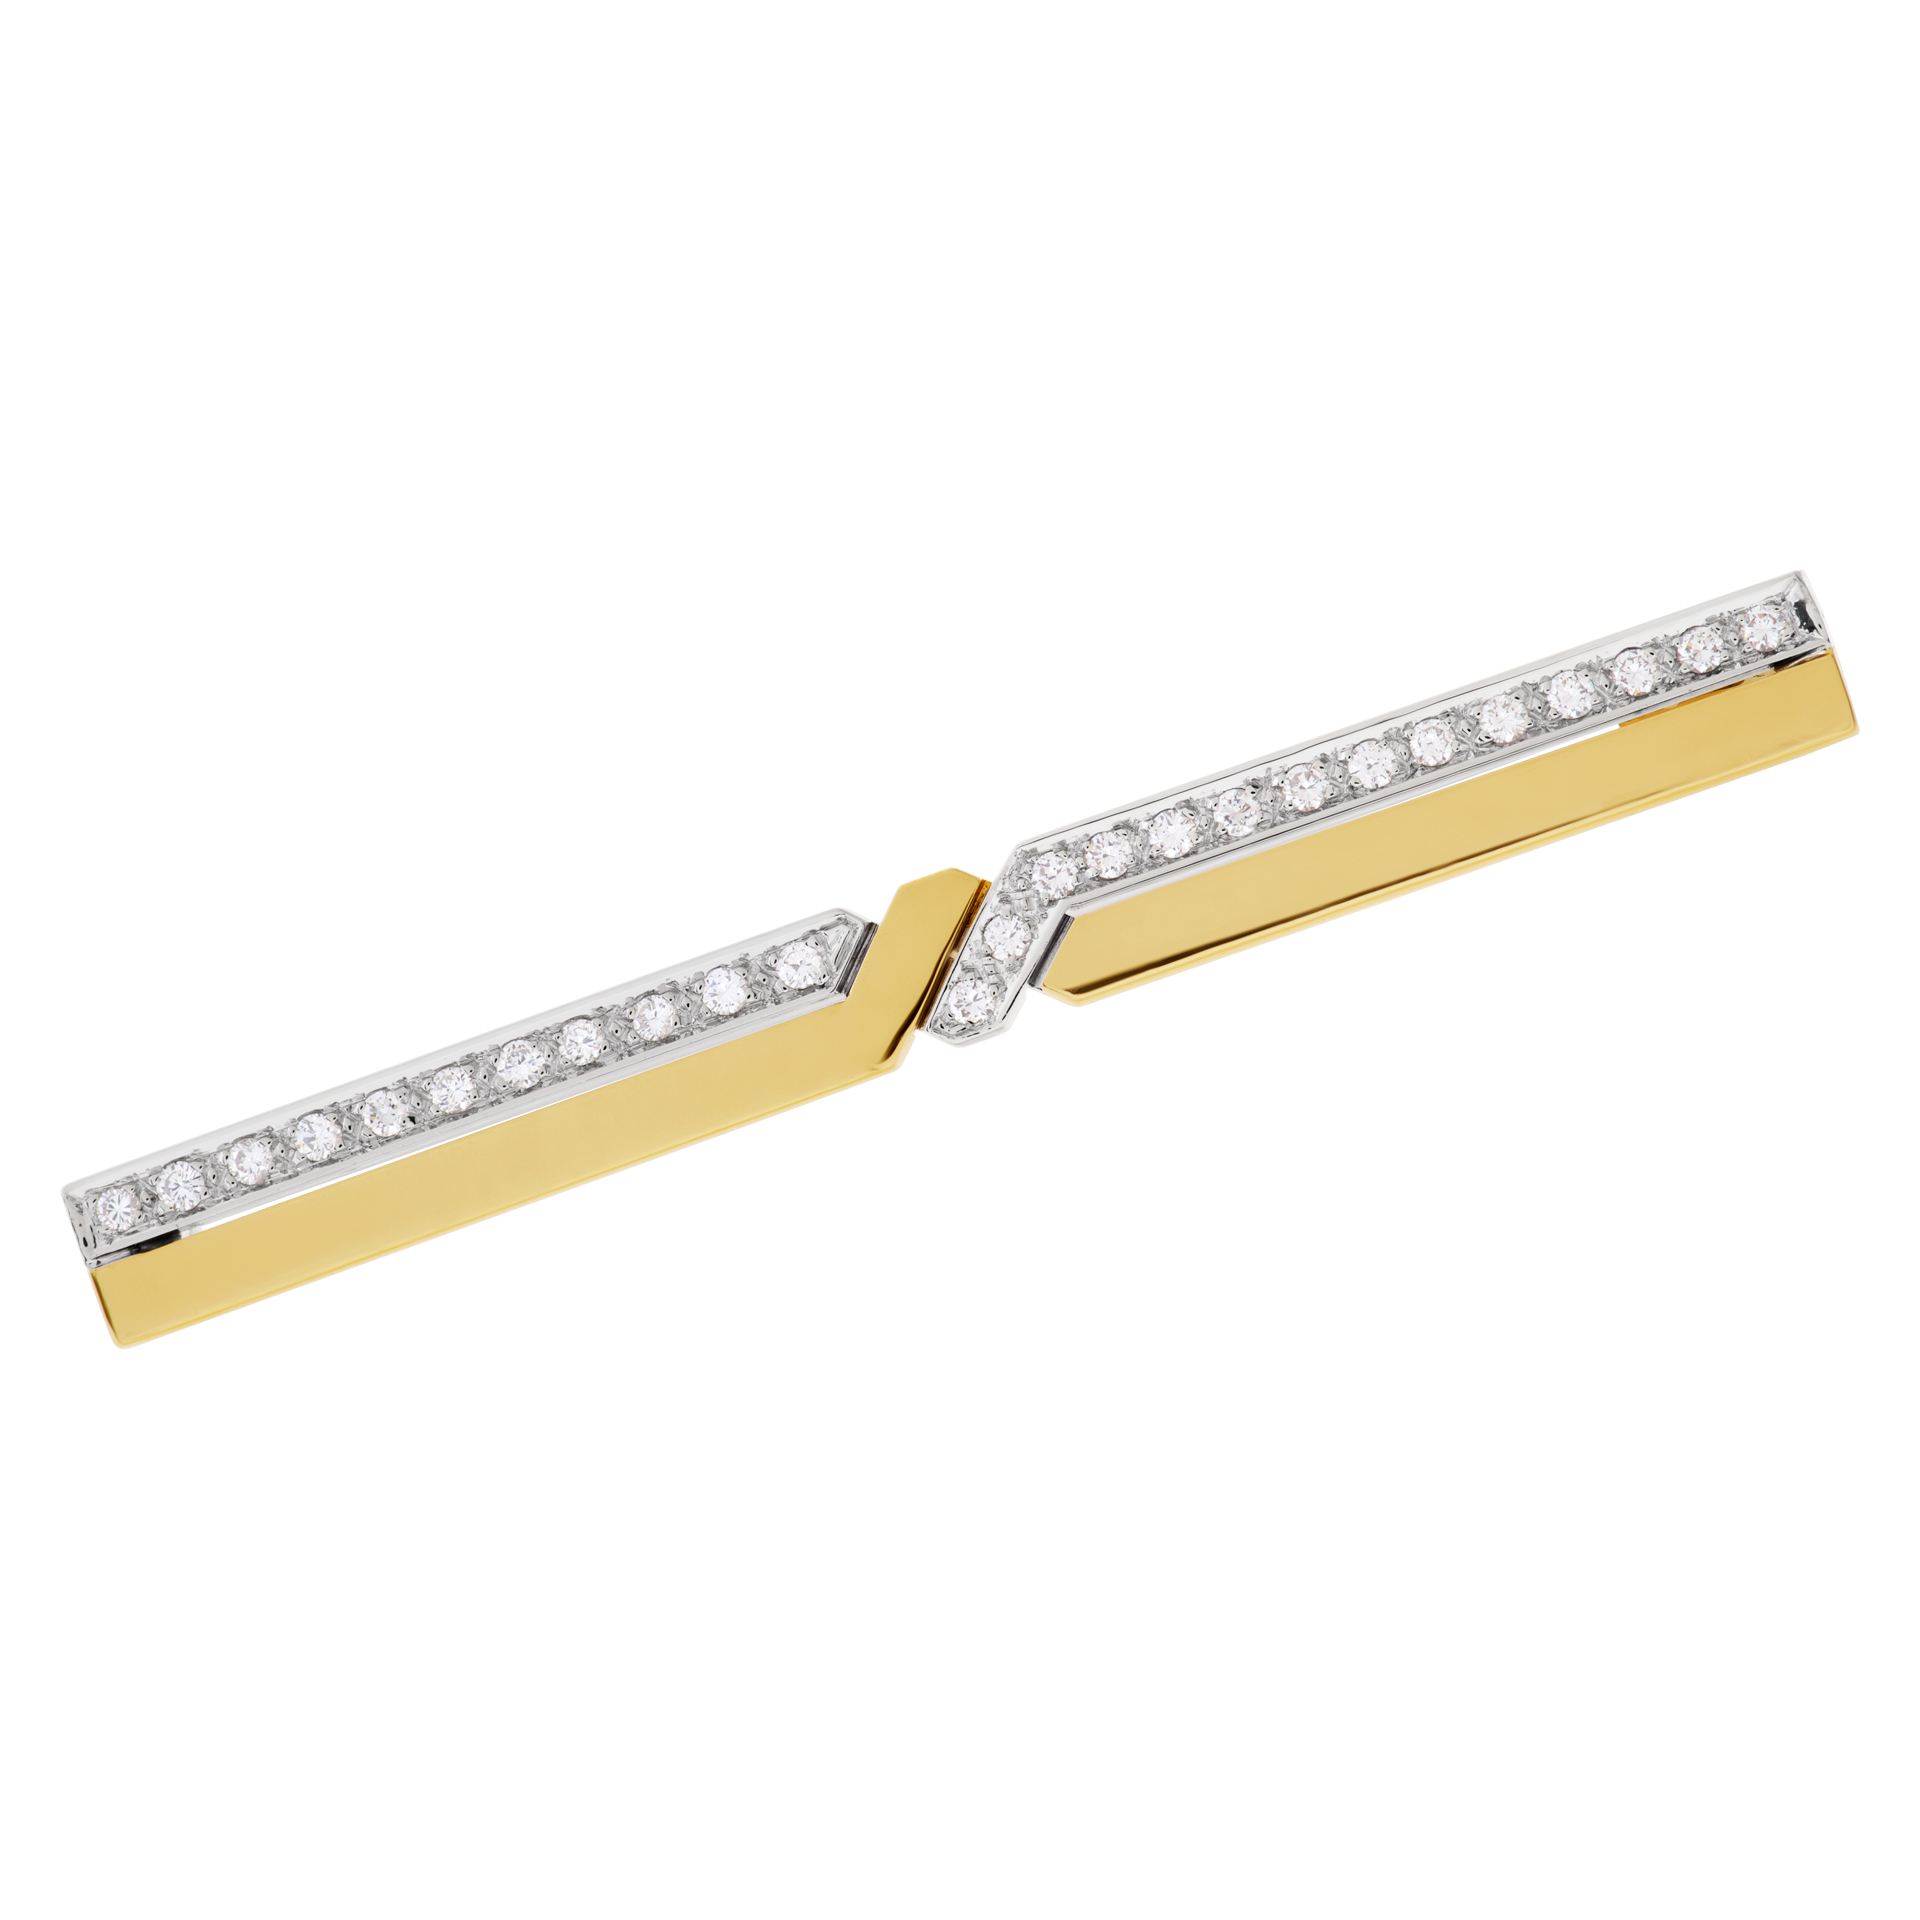 Pomellato Lightning Bolt Pin In 18k White & Yellow Gold With App 0.75 Cts In Diamonds